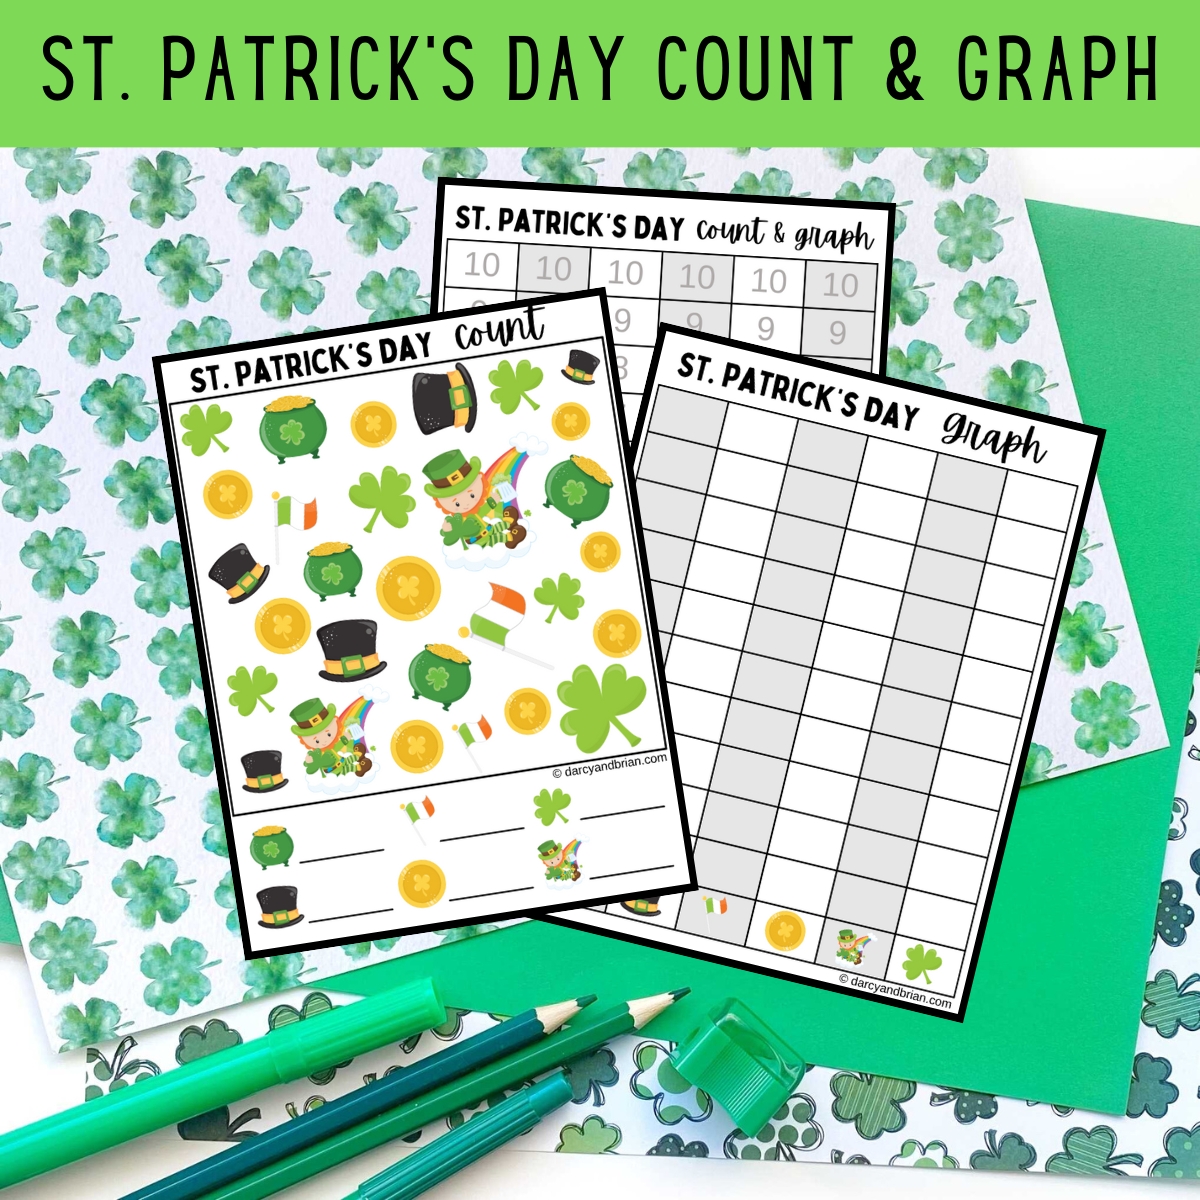 St Patrick's Day Count and Graph